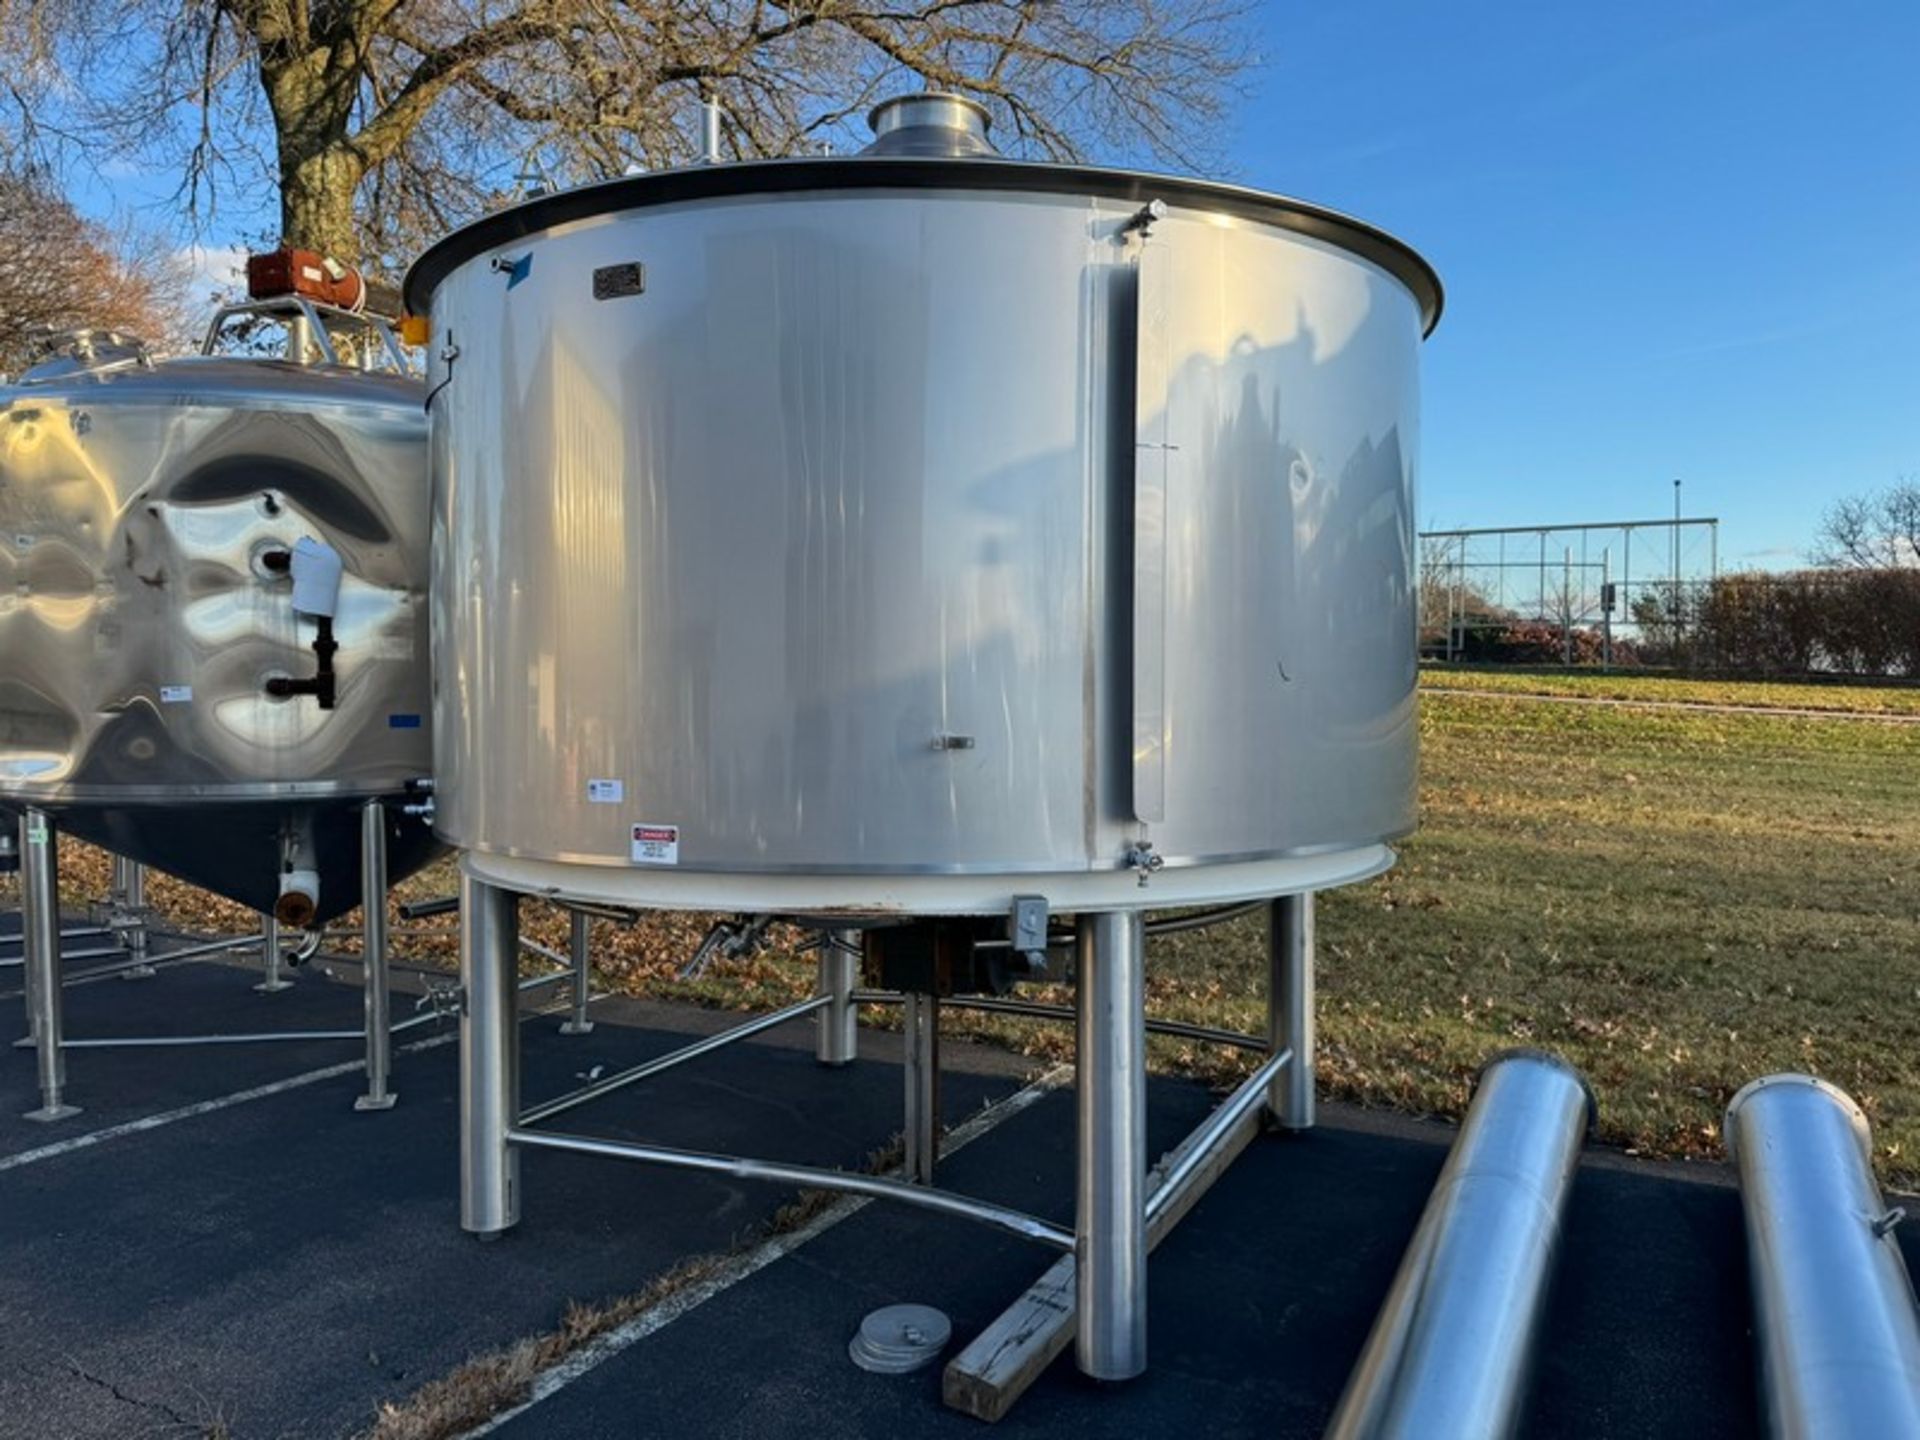 2012 Specific Mechanical Systems 45 BBL Capacity S/S Lauter Tun Tank, S/N RMP-136-12, with Legs, - Image 2 of 14